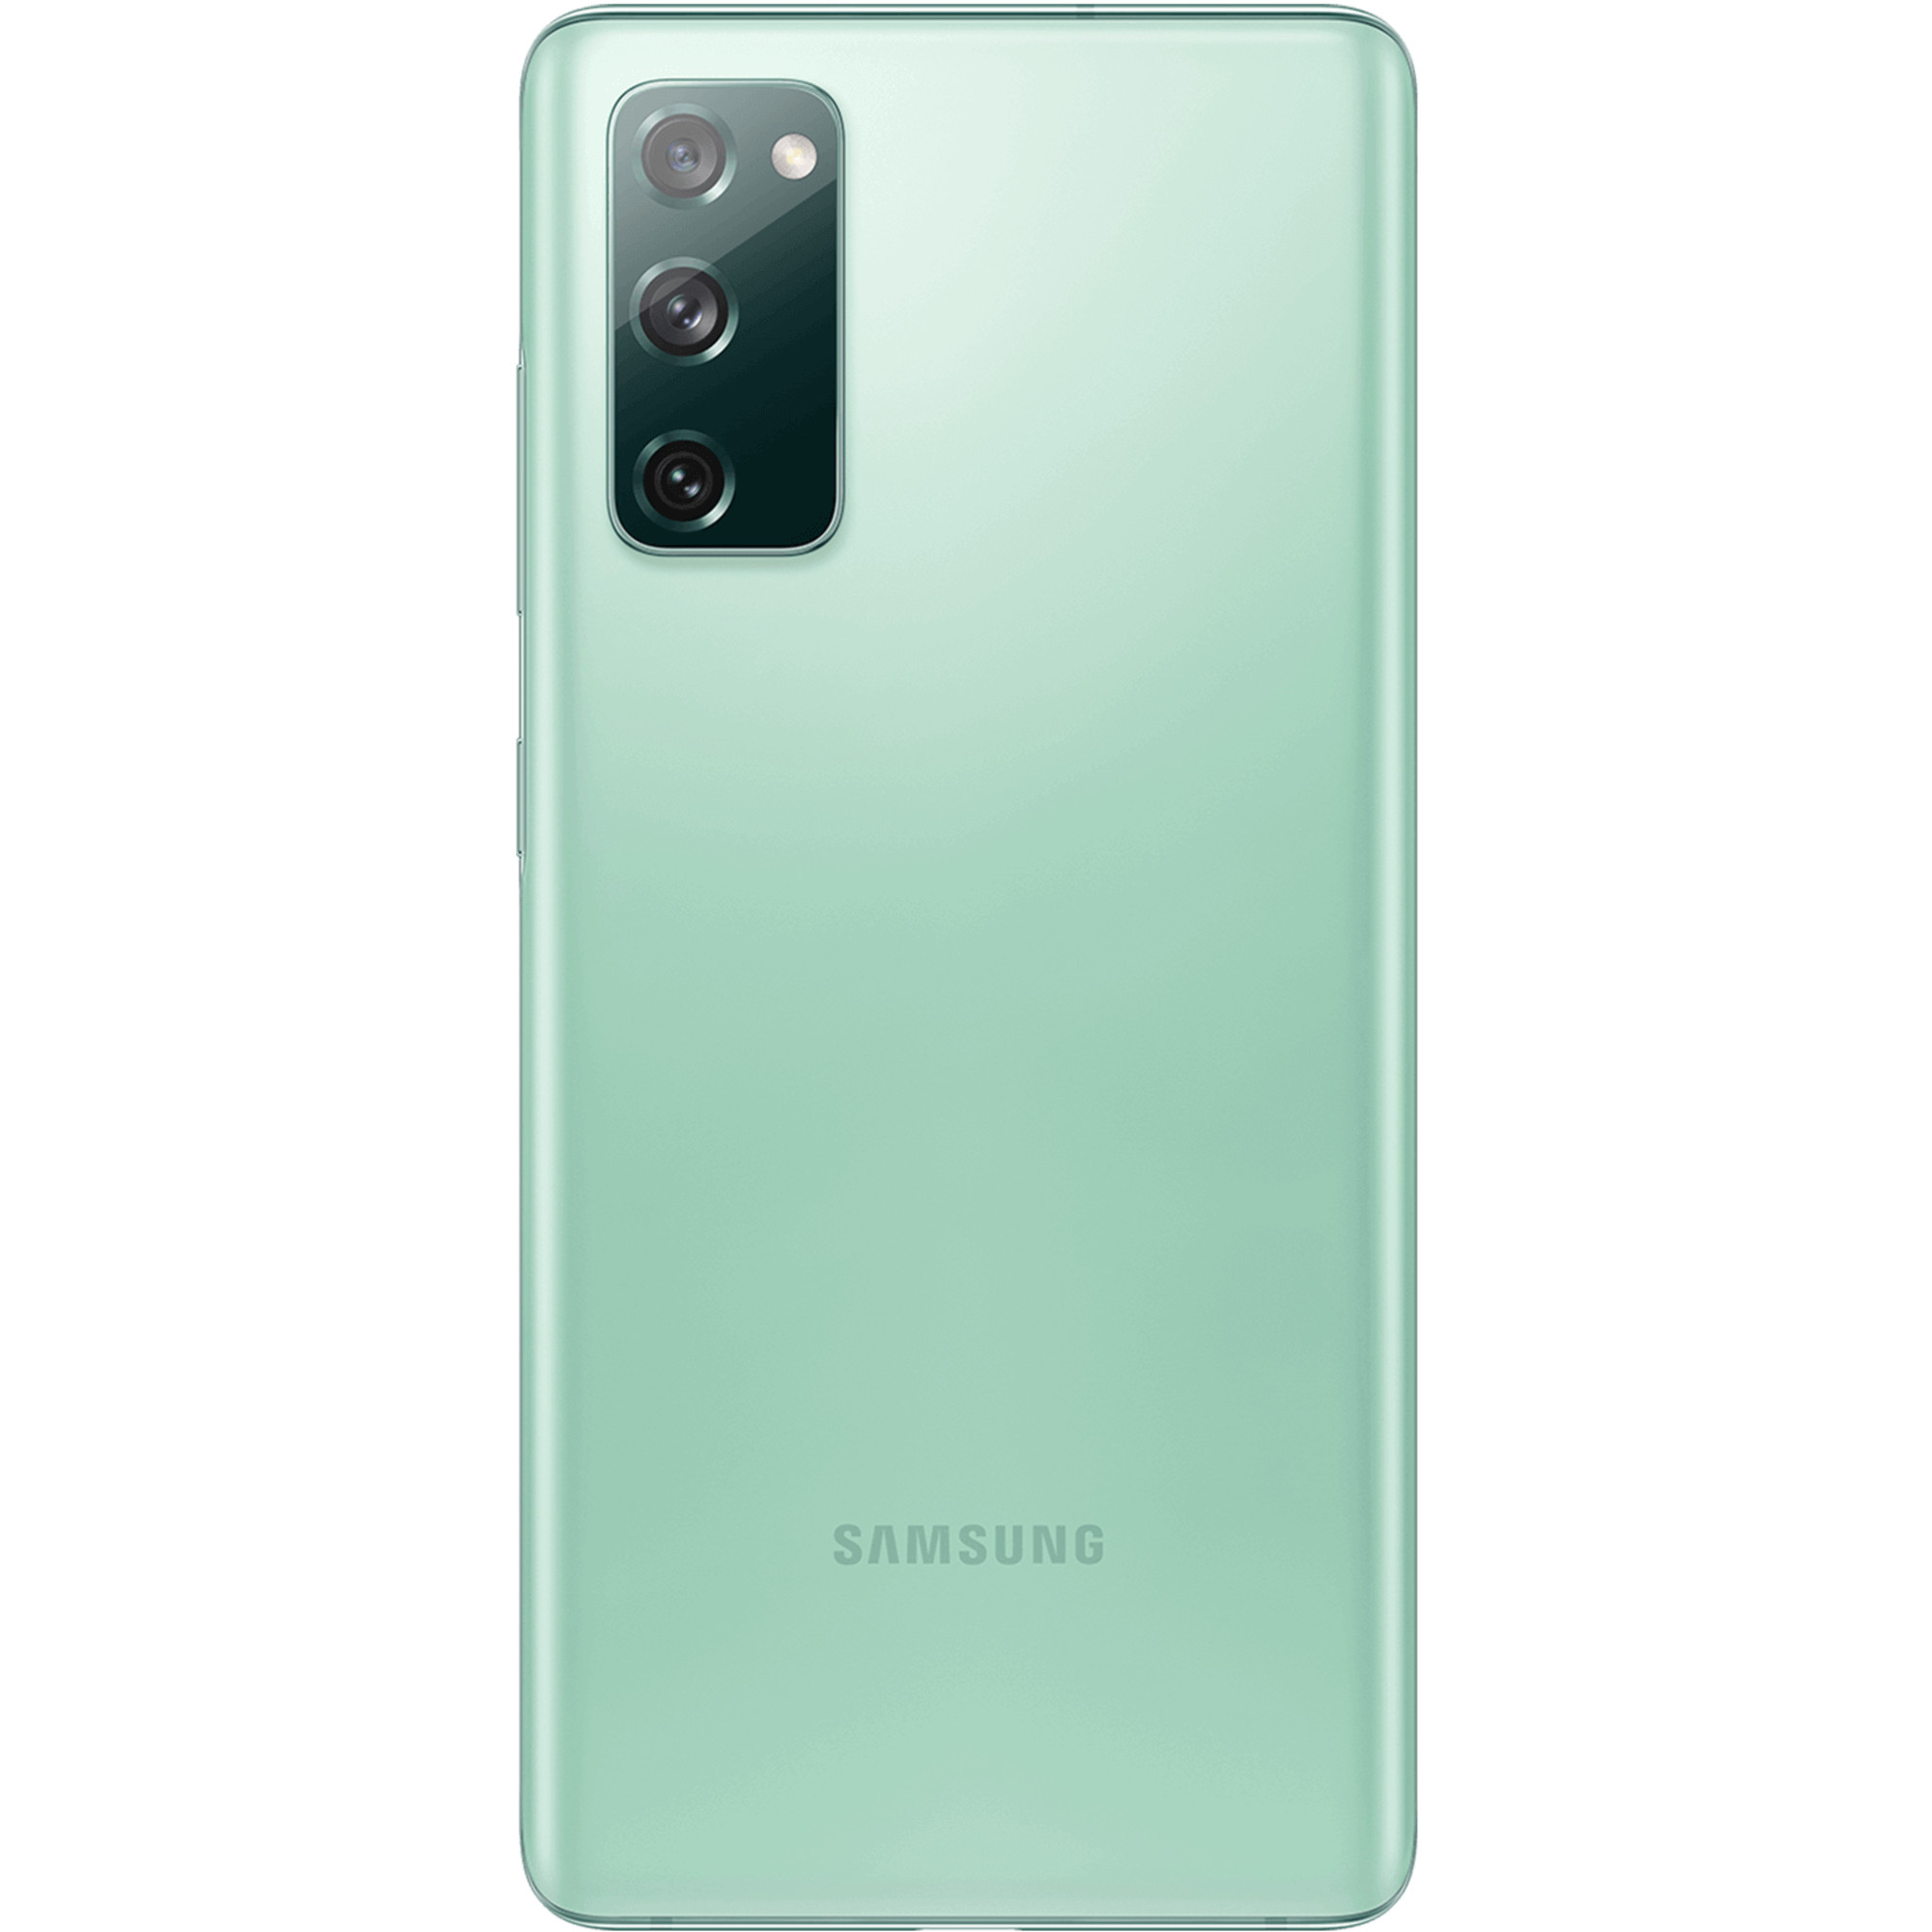 Samsung Galaxy S20 FE G780G 128GB Dual Sim GSM Unlocked Android Smart Phone (Latin America Variant/US Compatible LTE) - Cloud Green - image 2 of 4